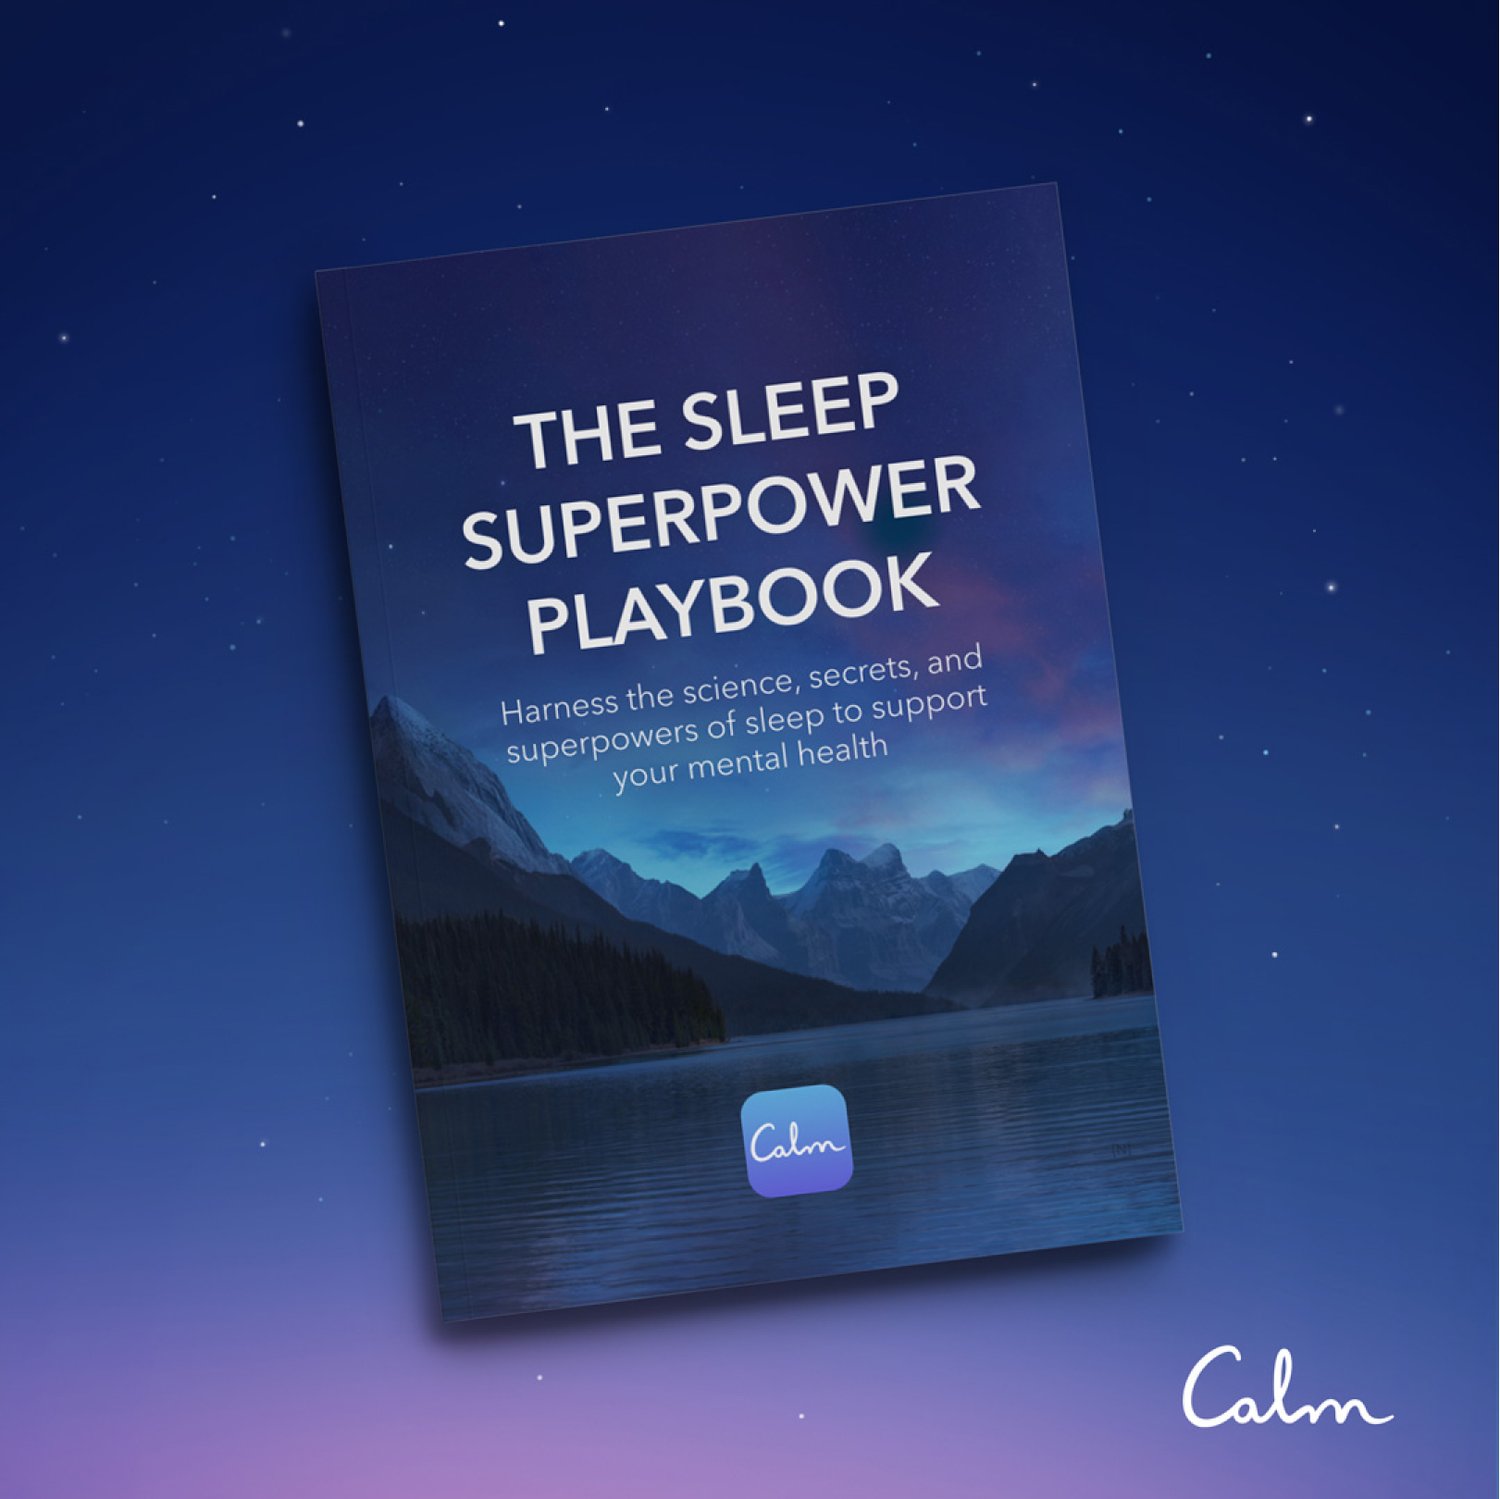 Harness The Secrets and techniques, Science & Superpowers of Sleep To Guidance Your Psychological Wellbeing — Calm Website